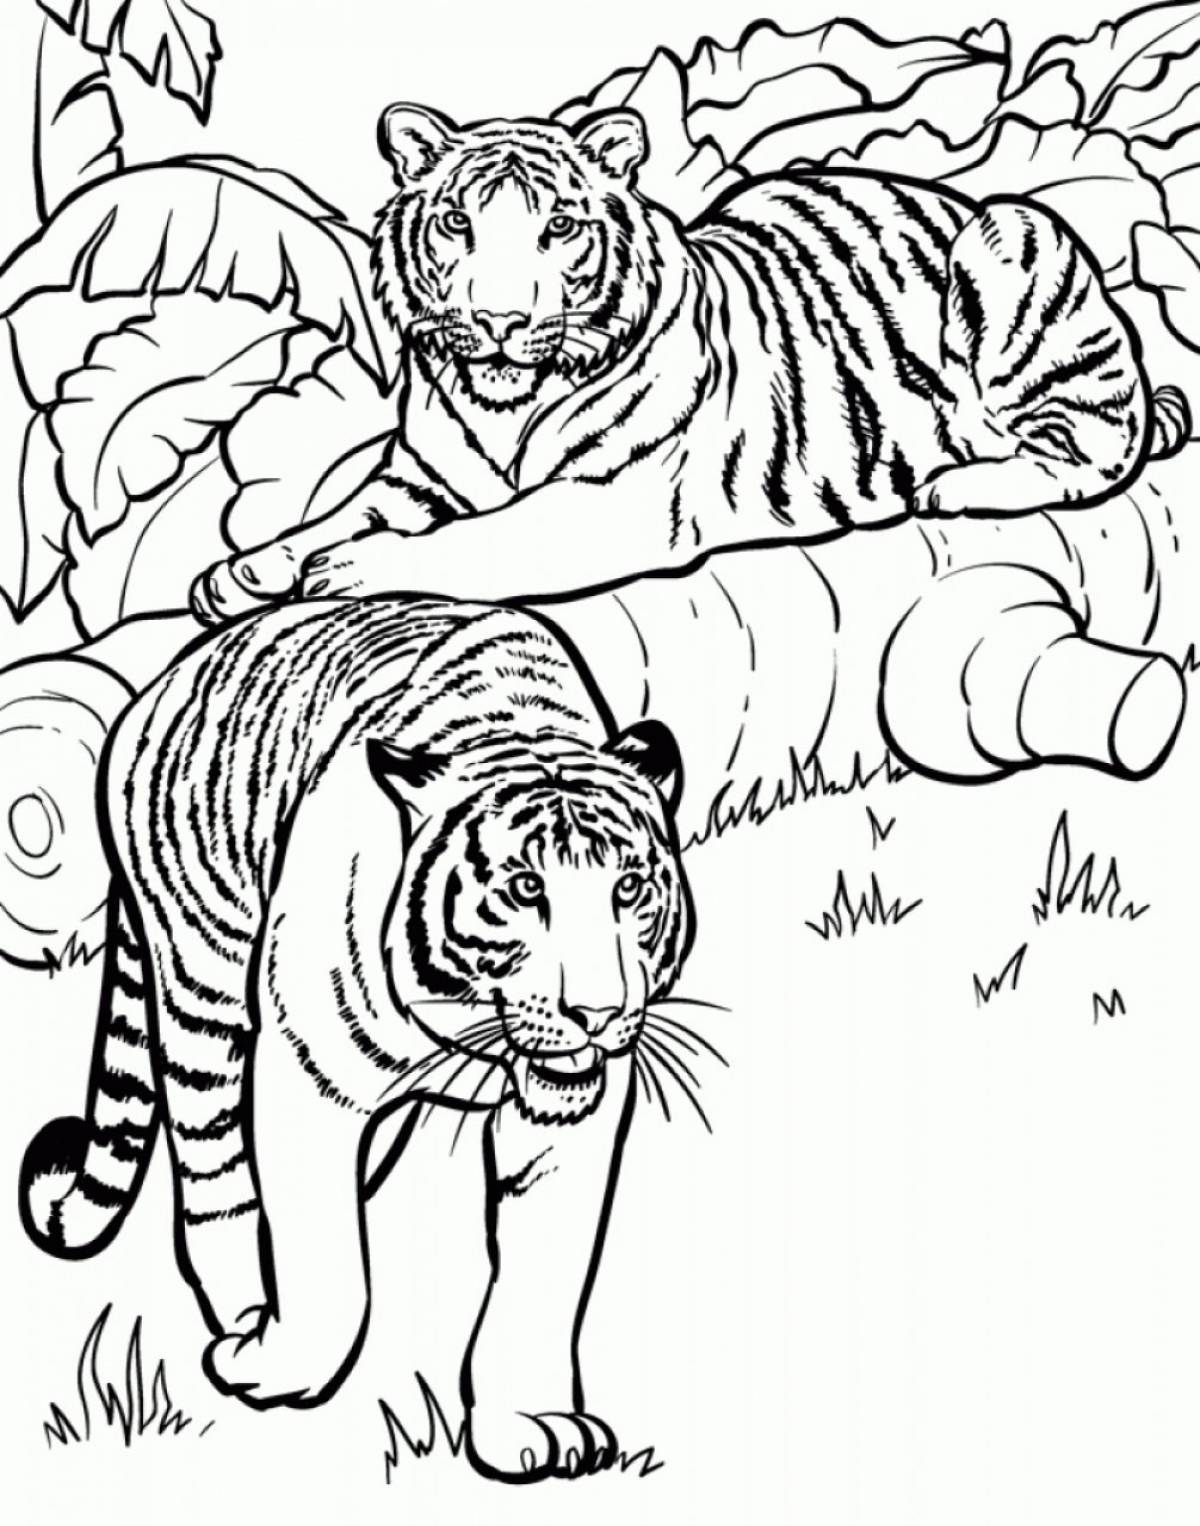 Outstanding tiger coloring book for 6-7 year olds